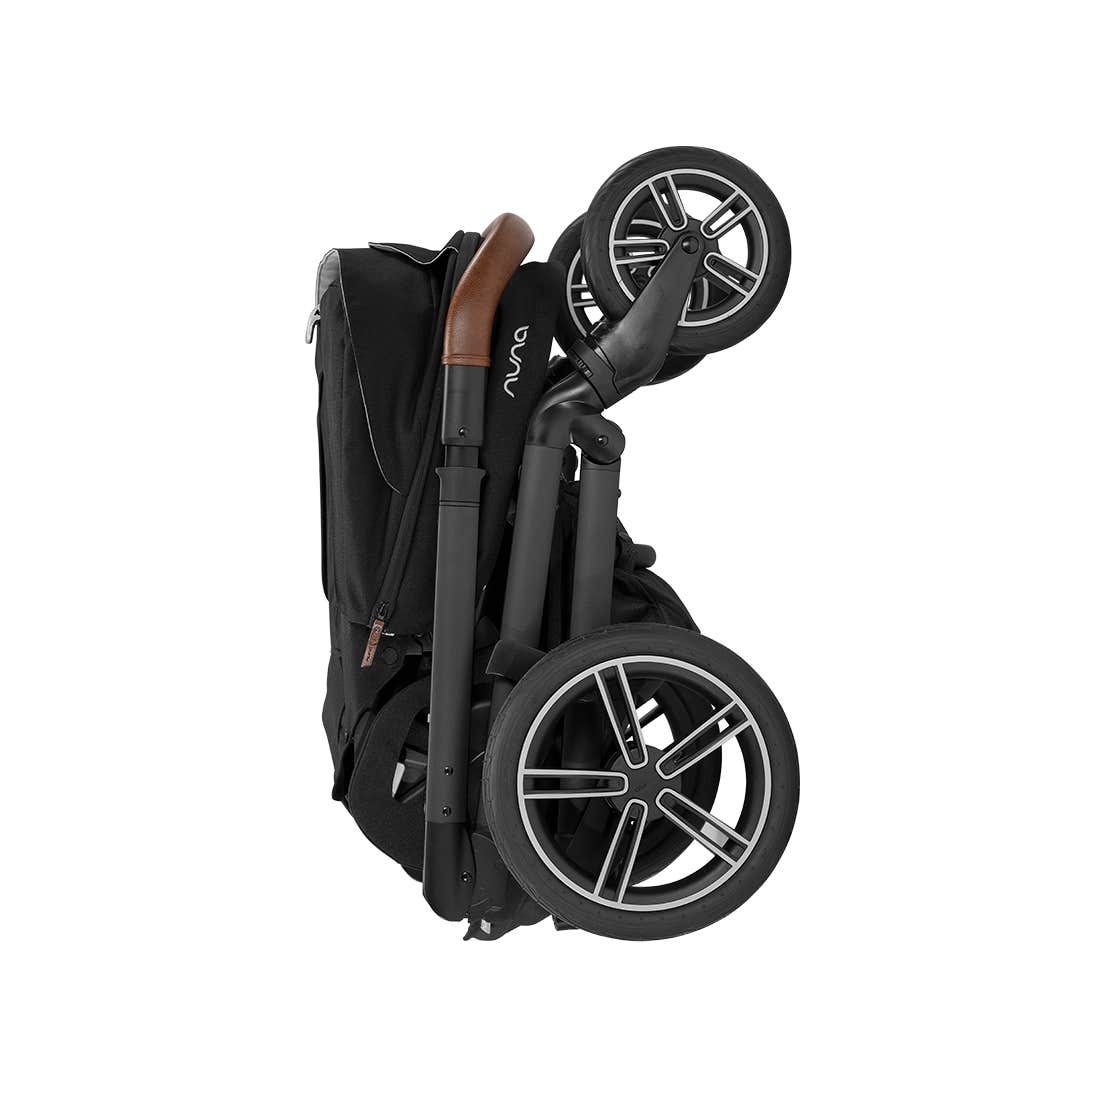 Nuna Mixx Next Stroller with Magnetic Buckle - ANB Baby -$500 - $1000